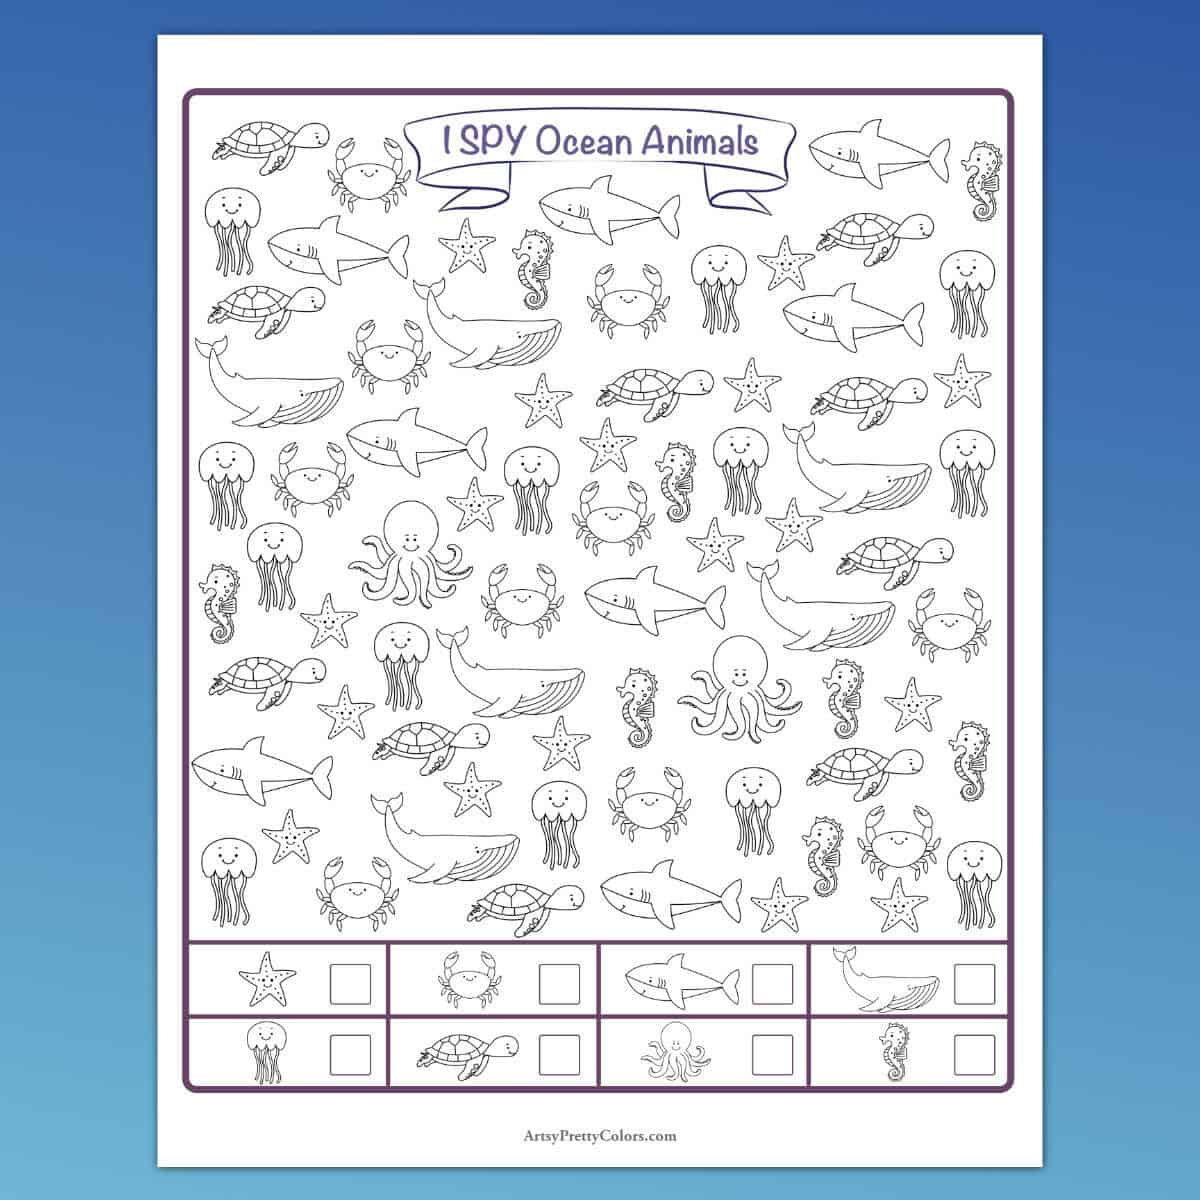 A page with many types of ocean animals and boxes at the bottom to be tallied.